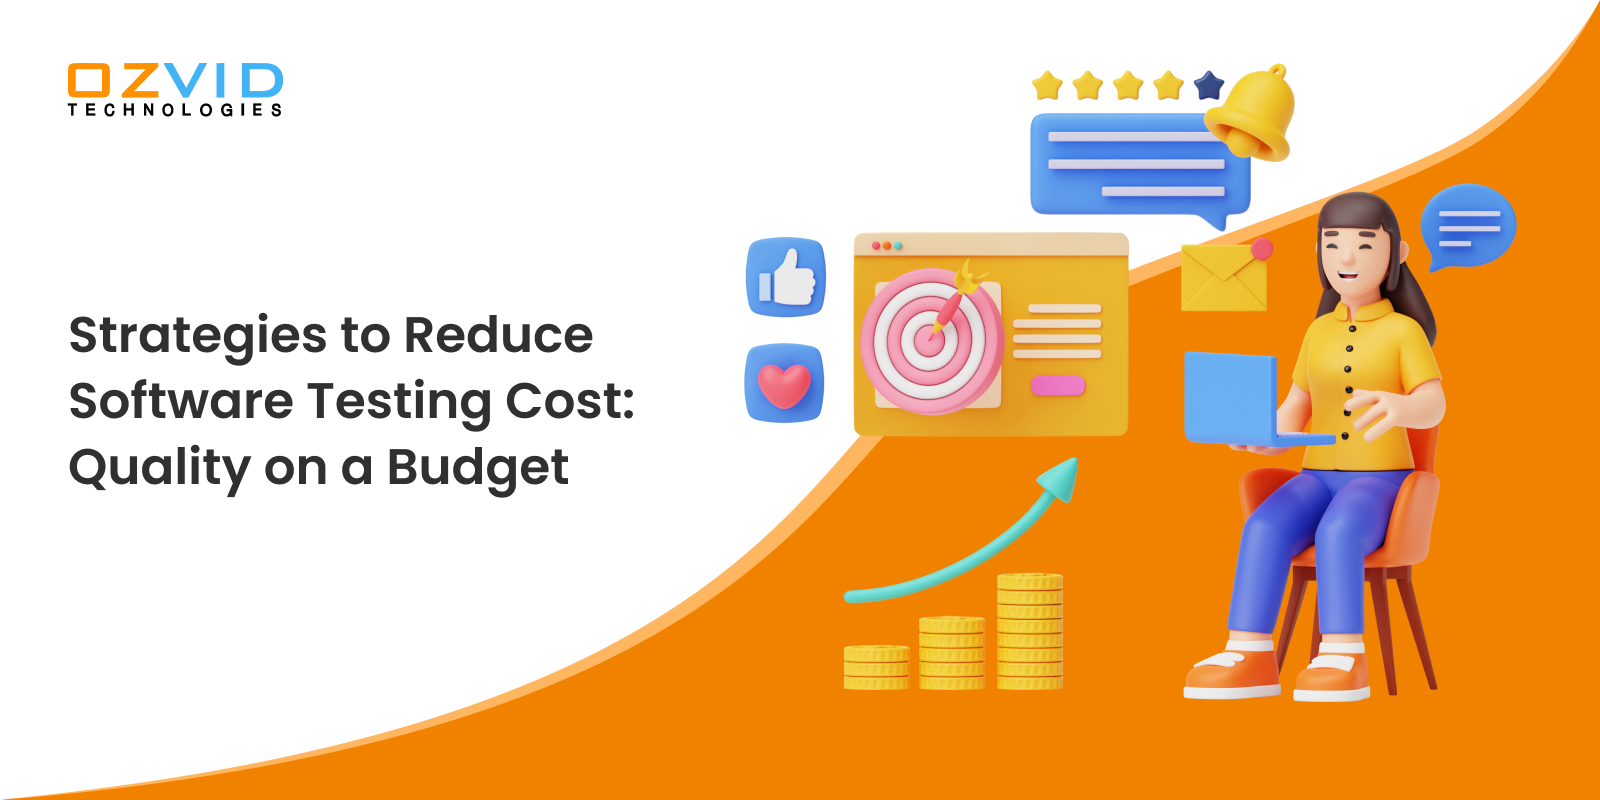 Strategies to Reduce Software Testing Cost: Quality on a Budget